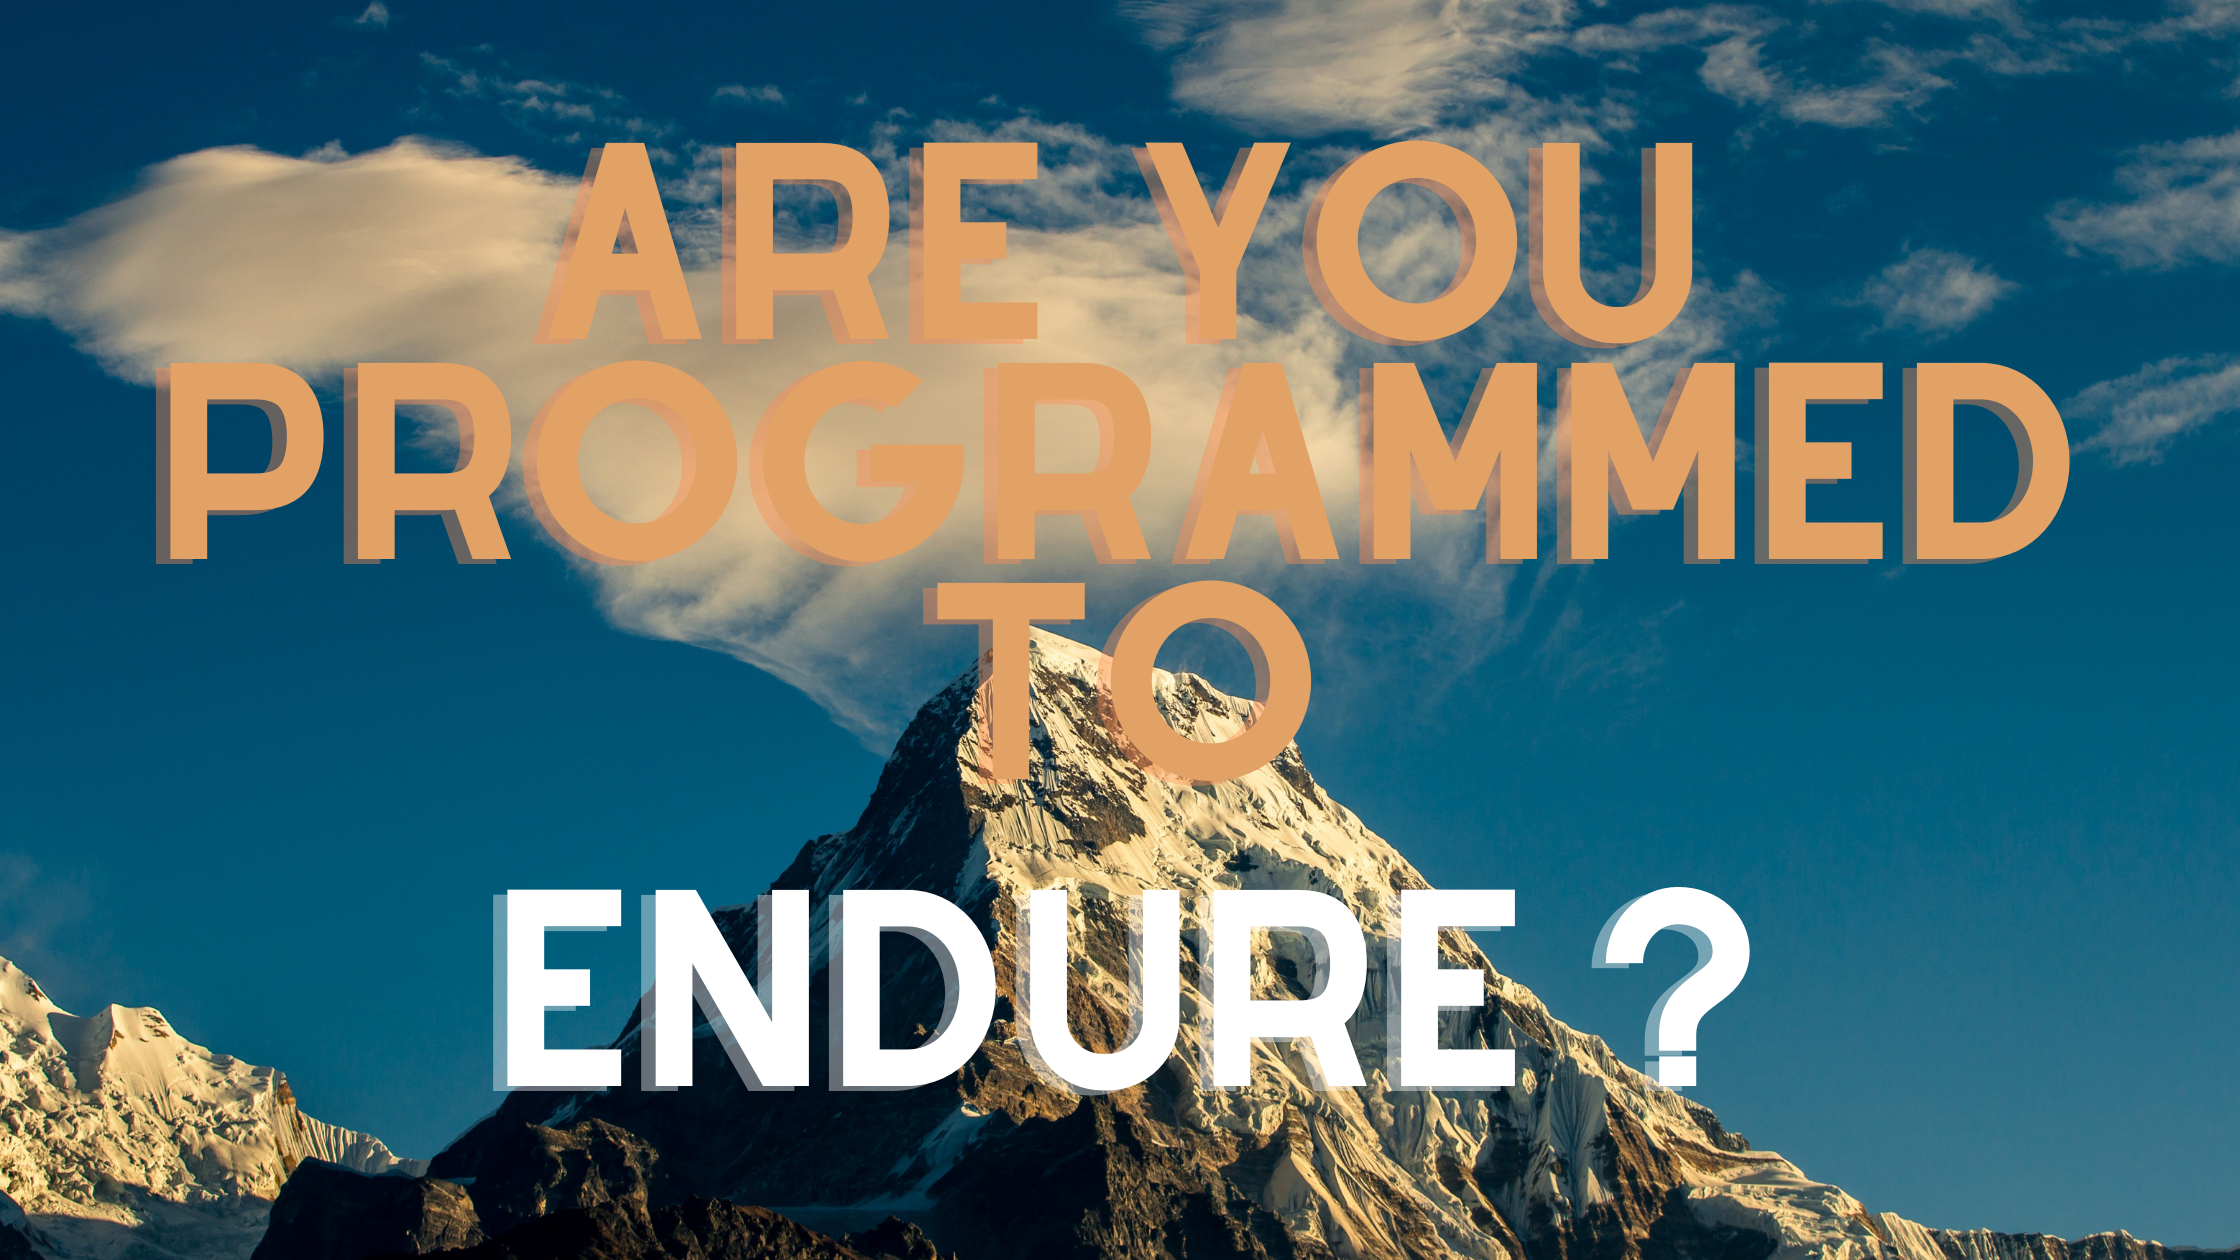 Are you programmed to endure?